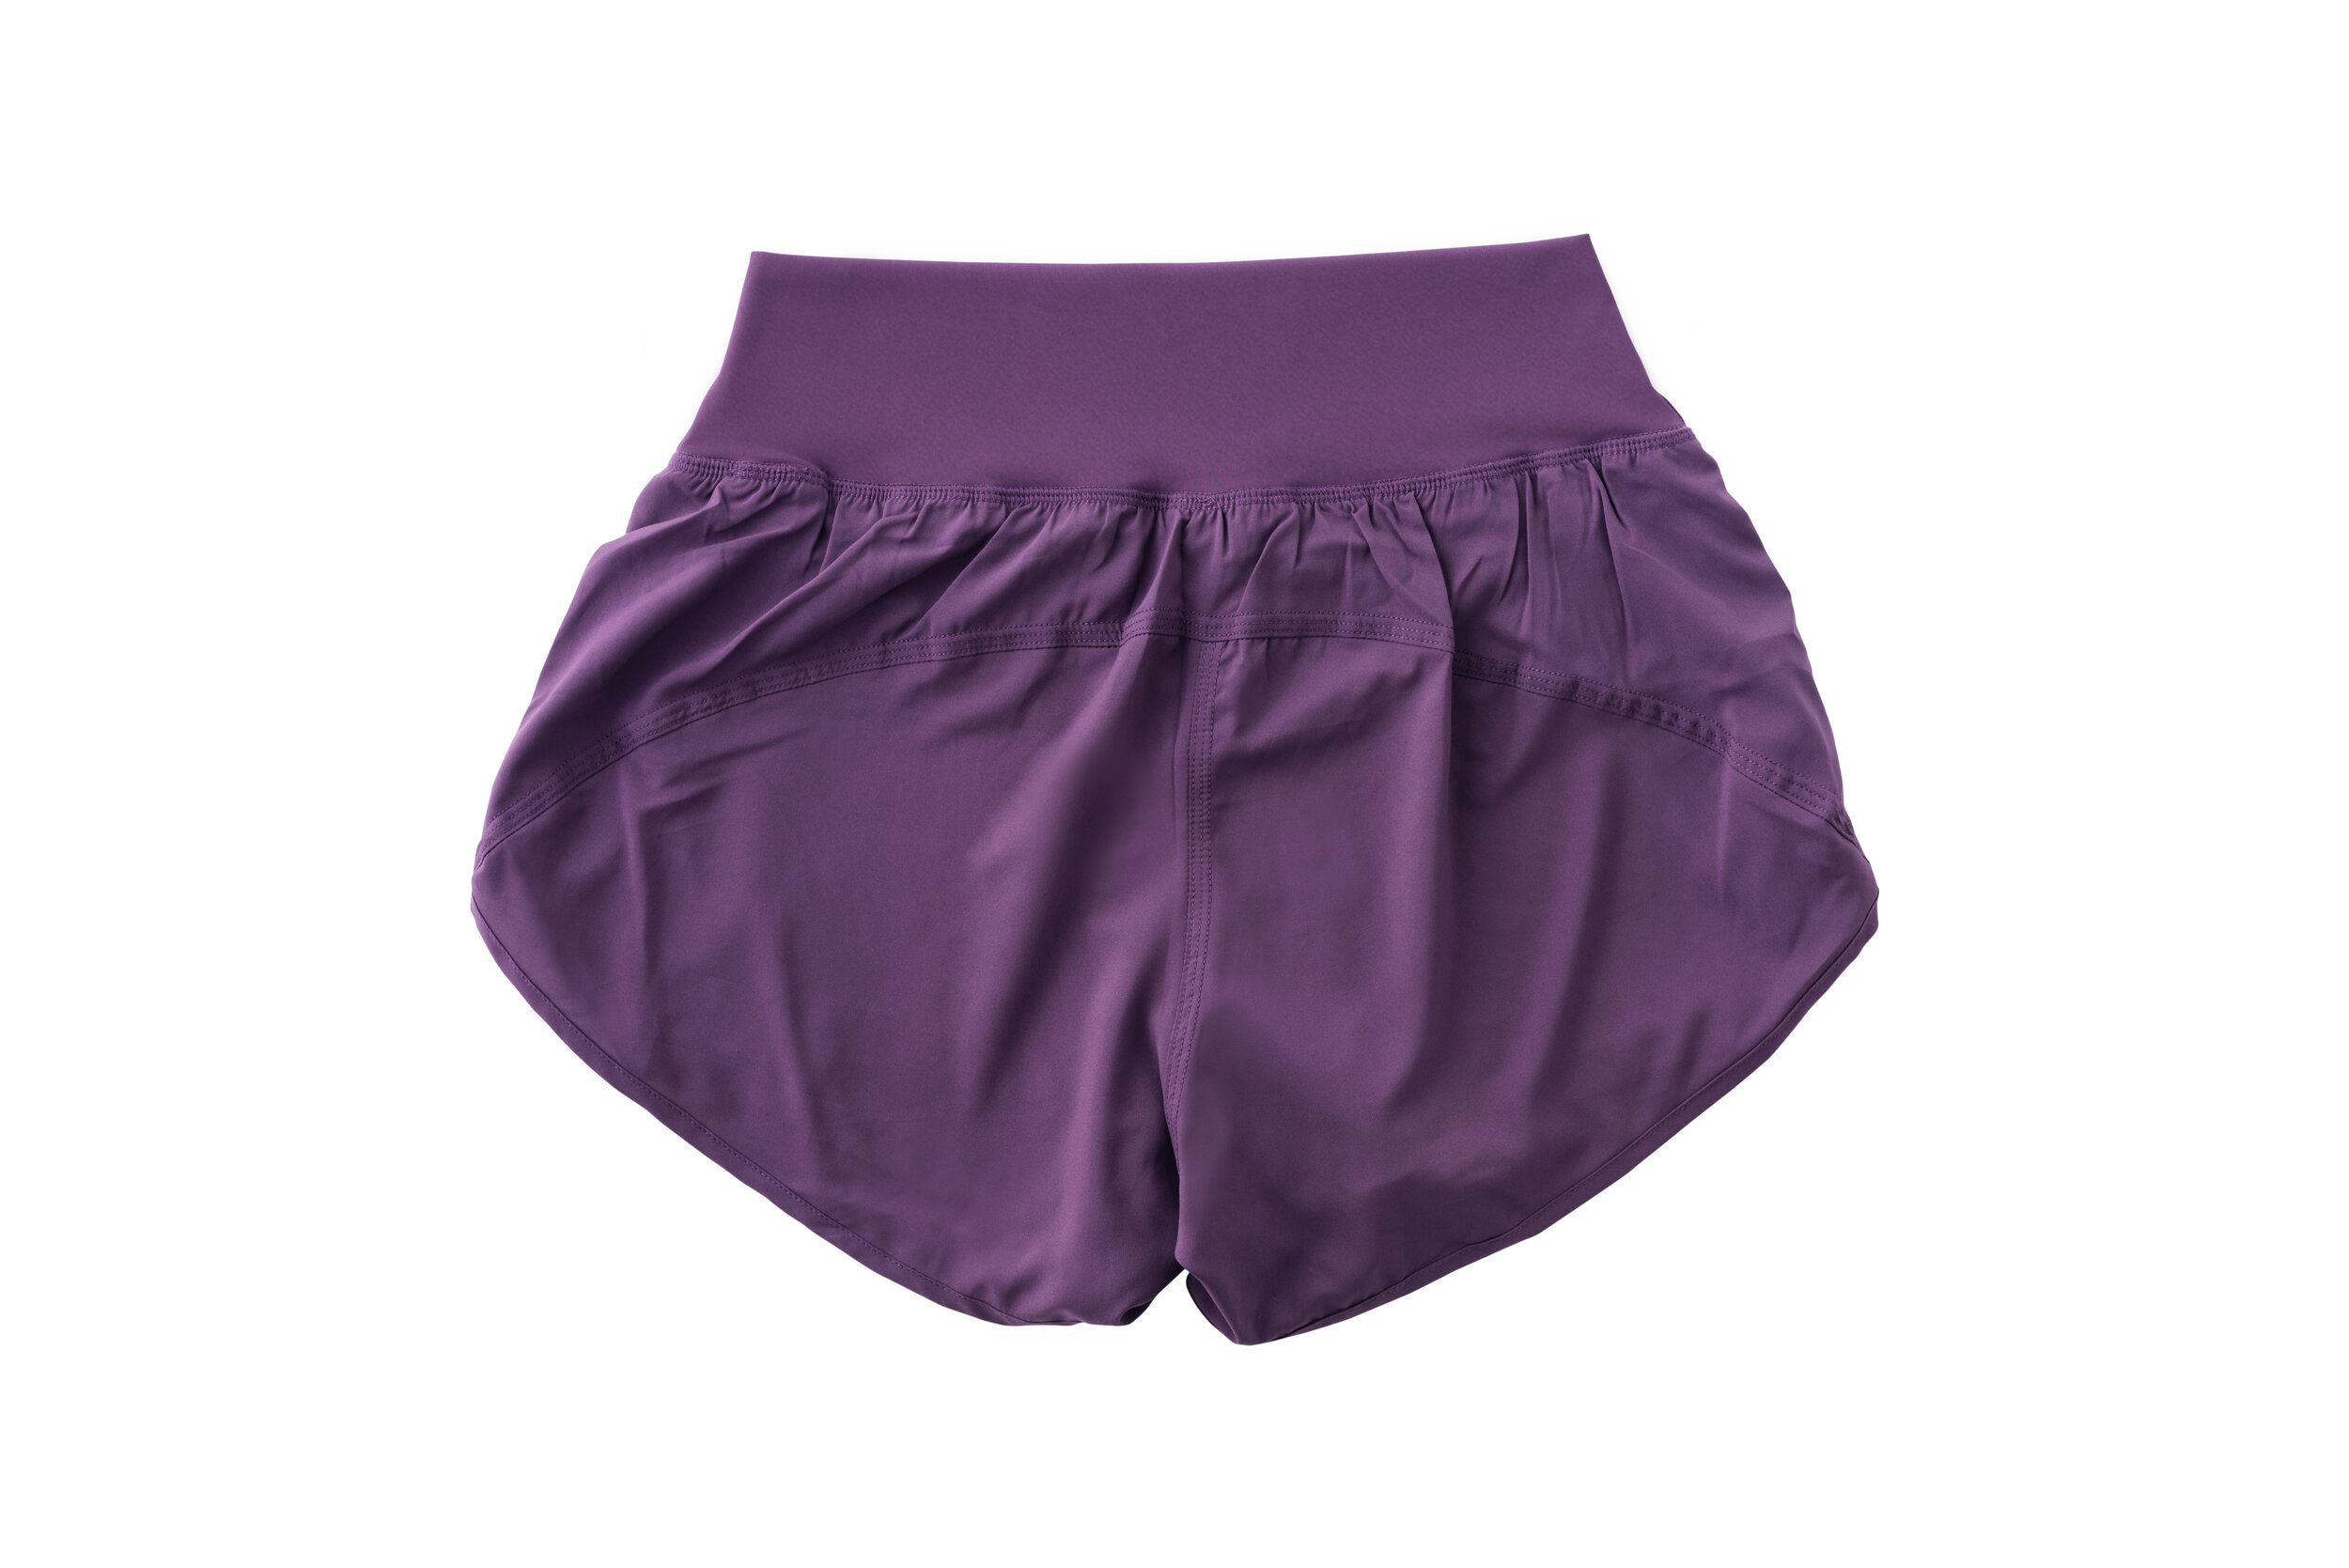 PHNX Serena Shorts Women's Two in One Shorts — PHNX